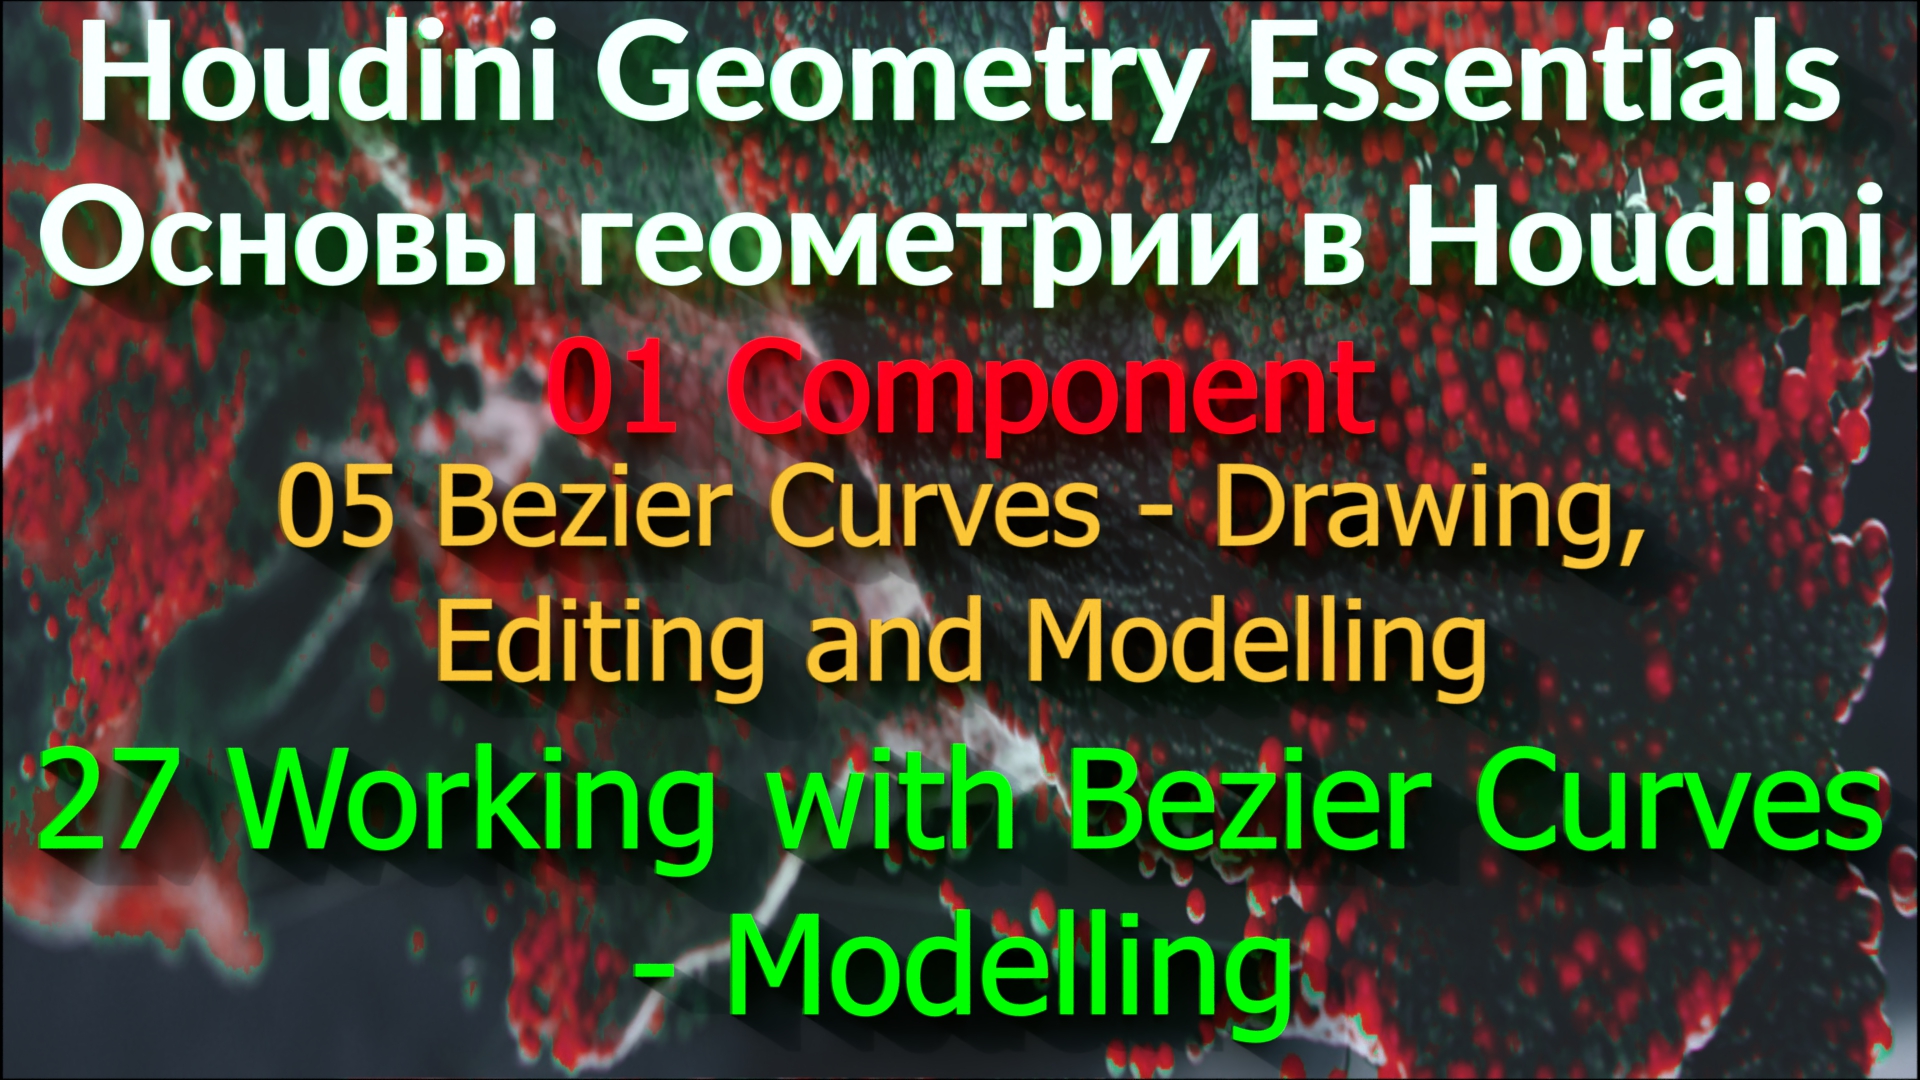 01_05_27. Working with Bezier Curves - Modelling